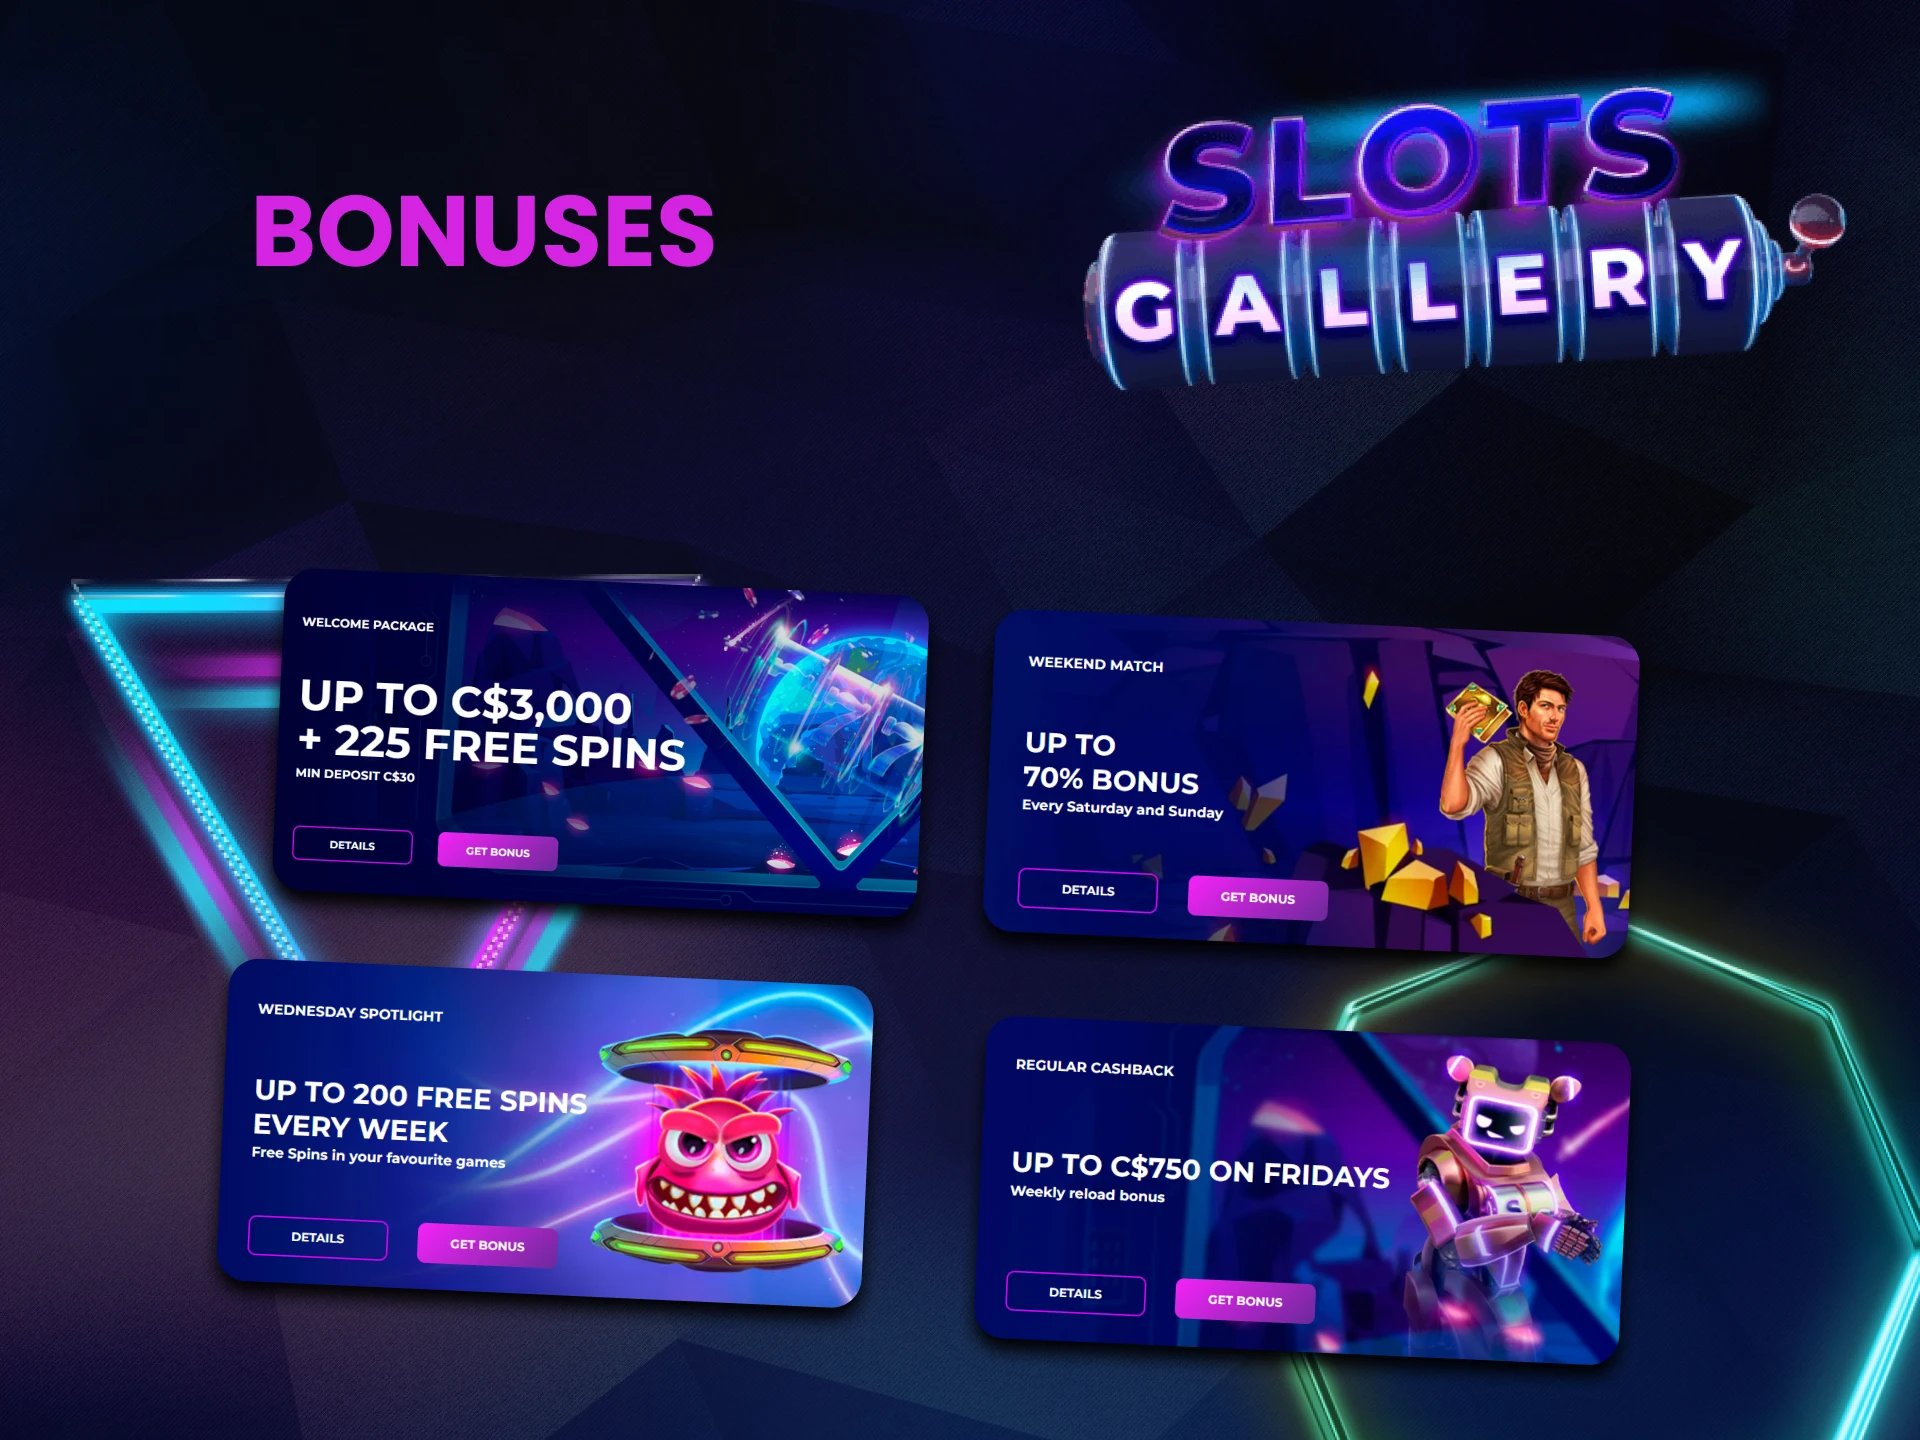 Slots Gallery gives bonuses for table games.